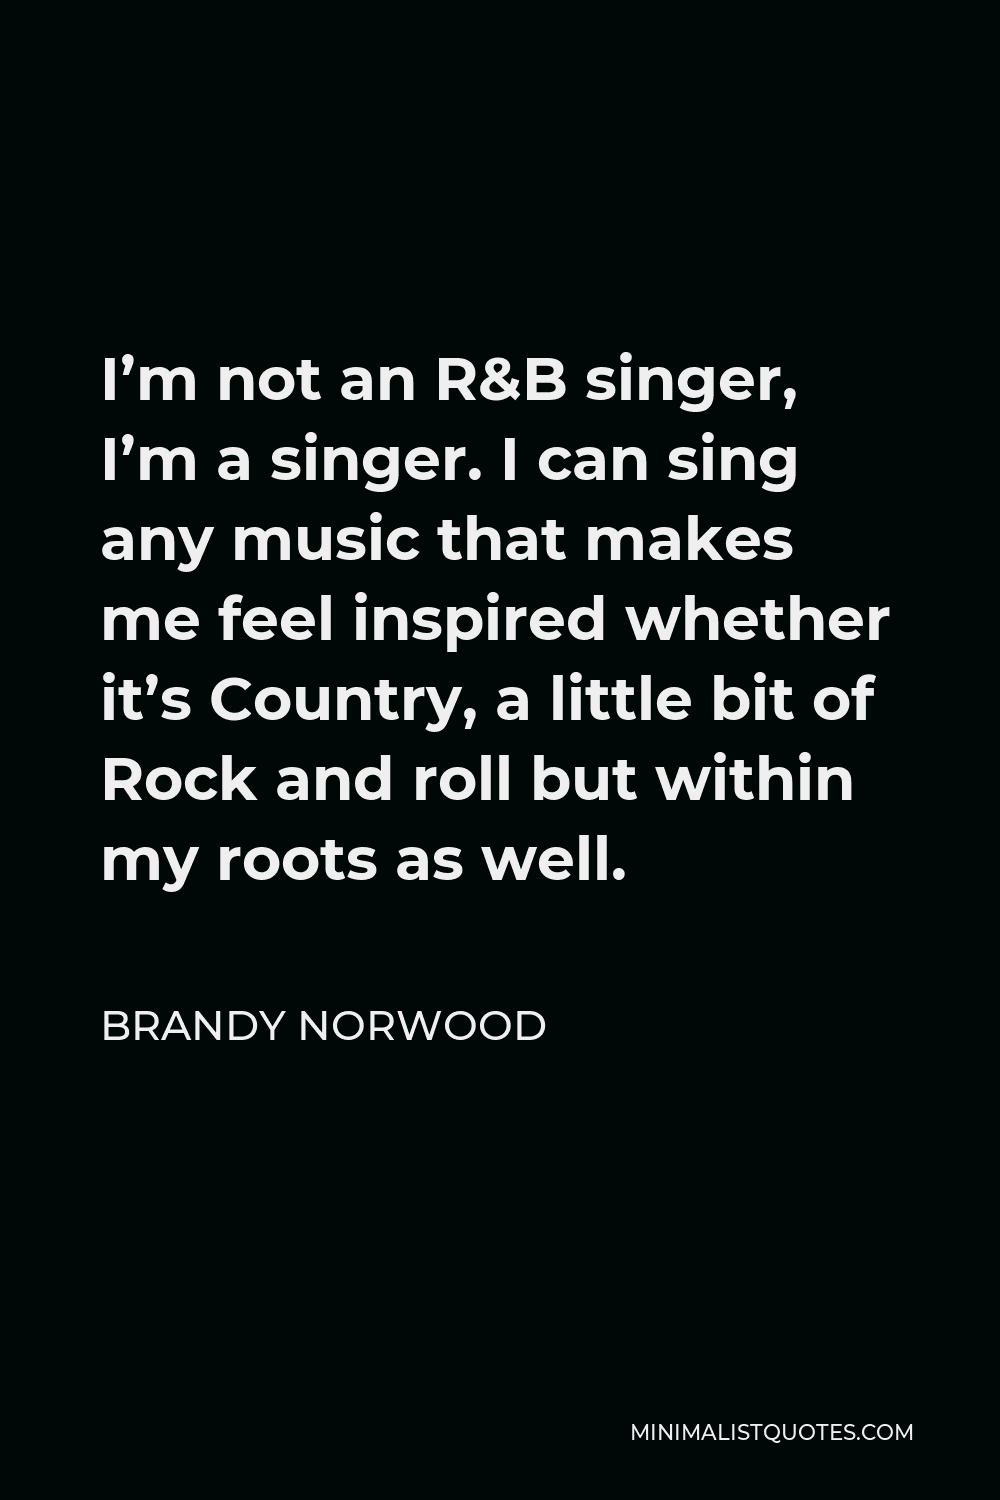 Brandy Norwood Quote - I’m not an R&B singer, I’m a singer. I can sing any music that makes me feel inspired whether it’s Country, a little bit of Rock and roll but within my roots as well.